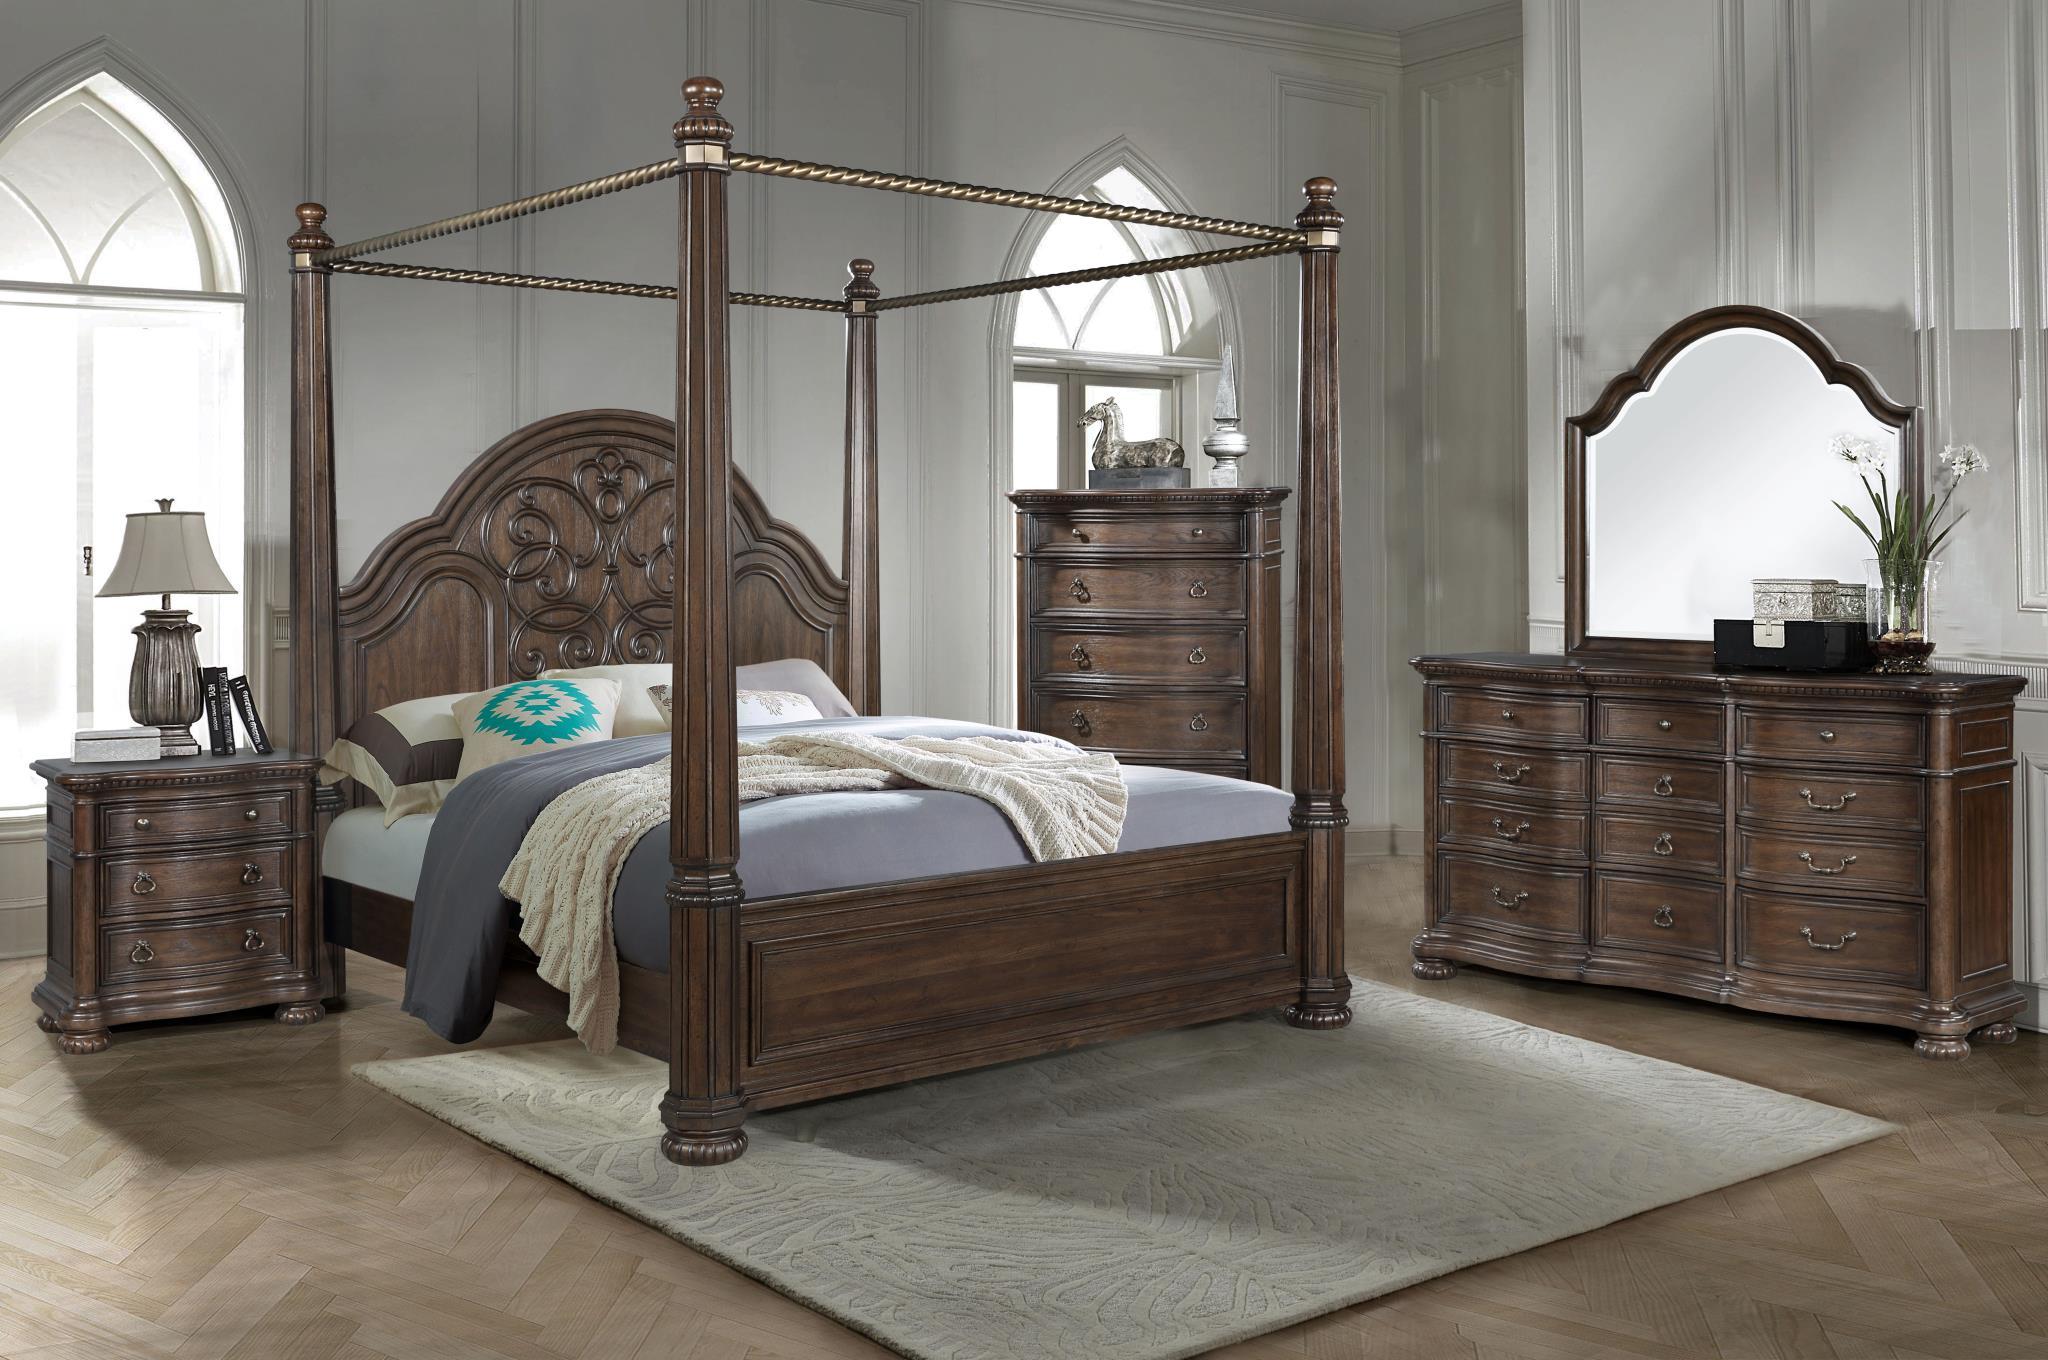 Contemporary, Traditional Canopy Bedroom Set TUSCANY 321-108-Set-3 321-108-2N-3PC in Brown 